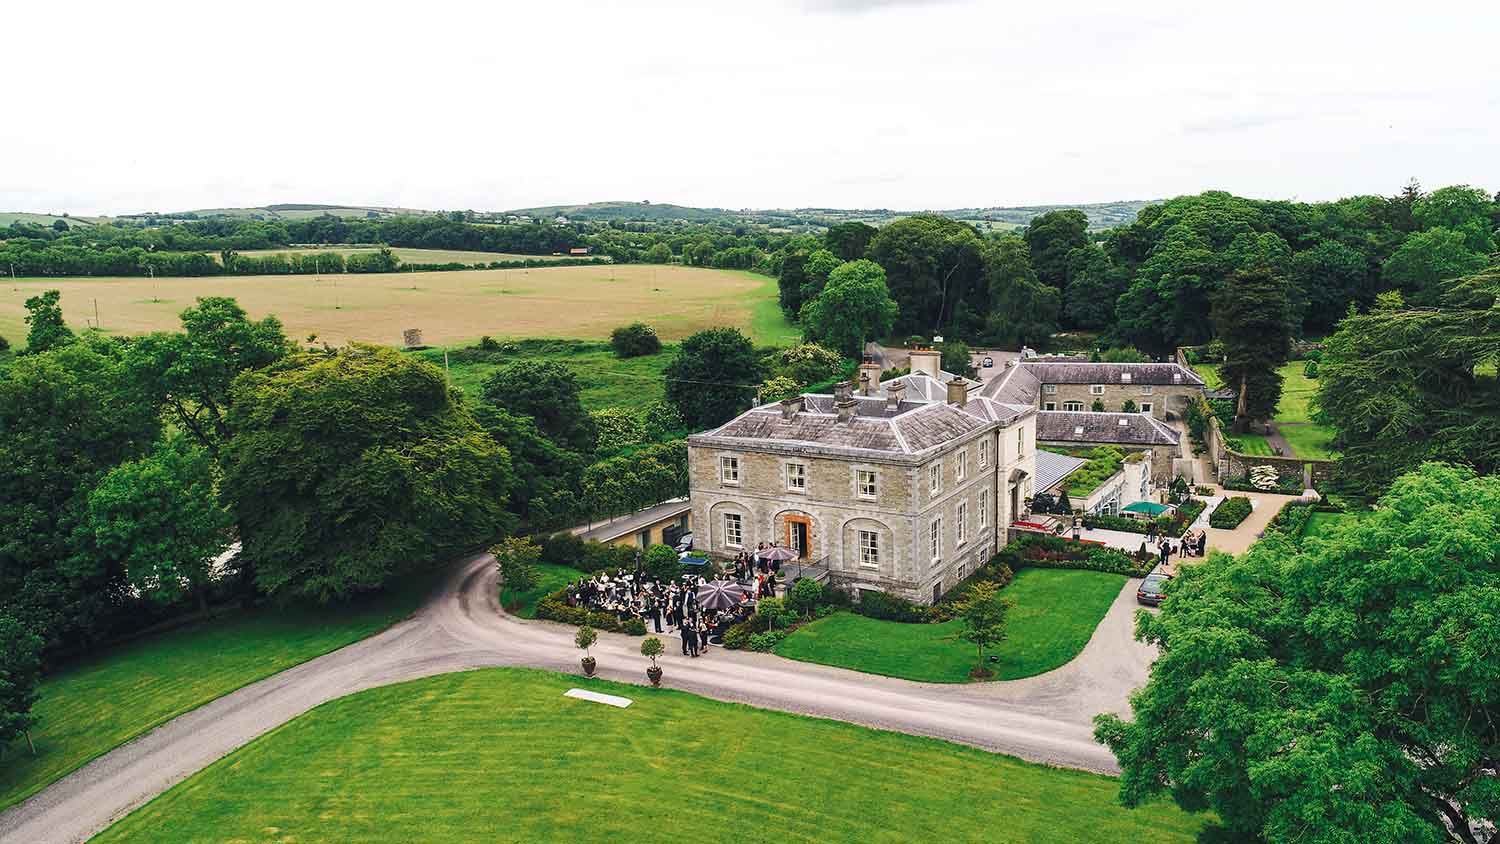 View of Tankardstown House from the air